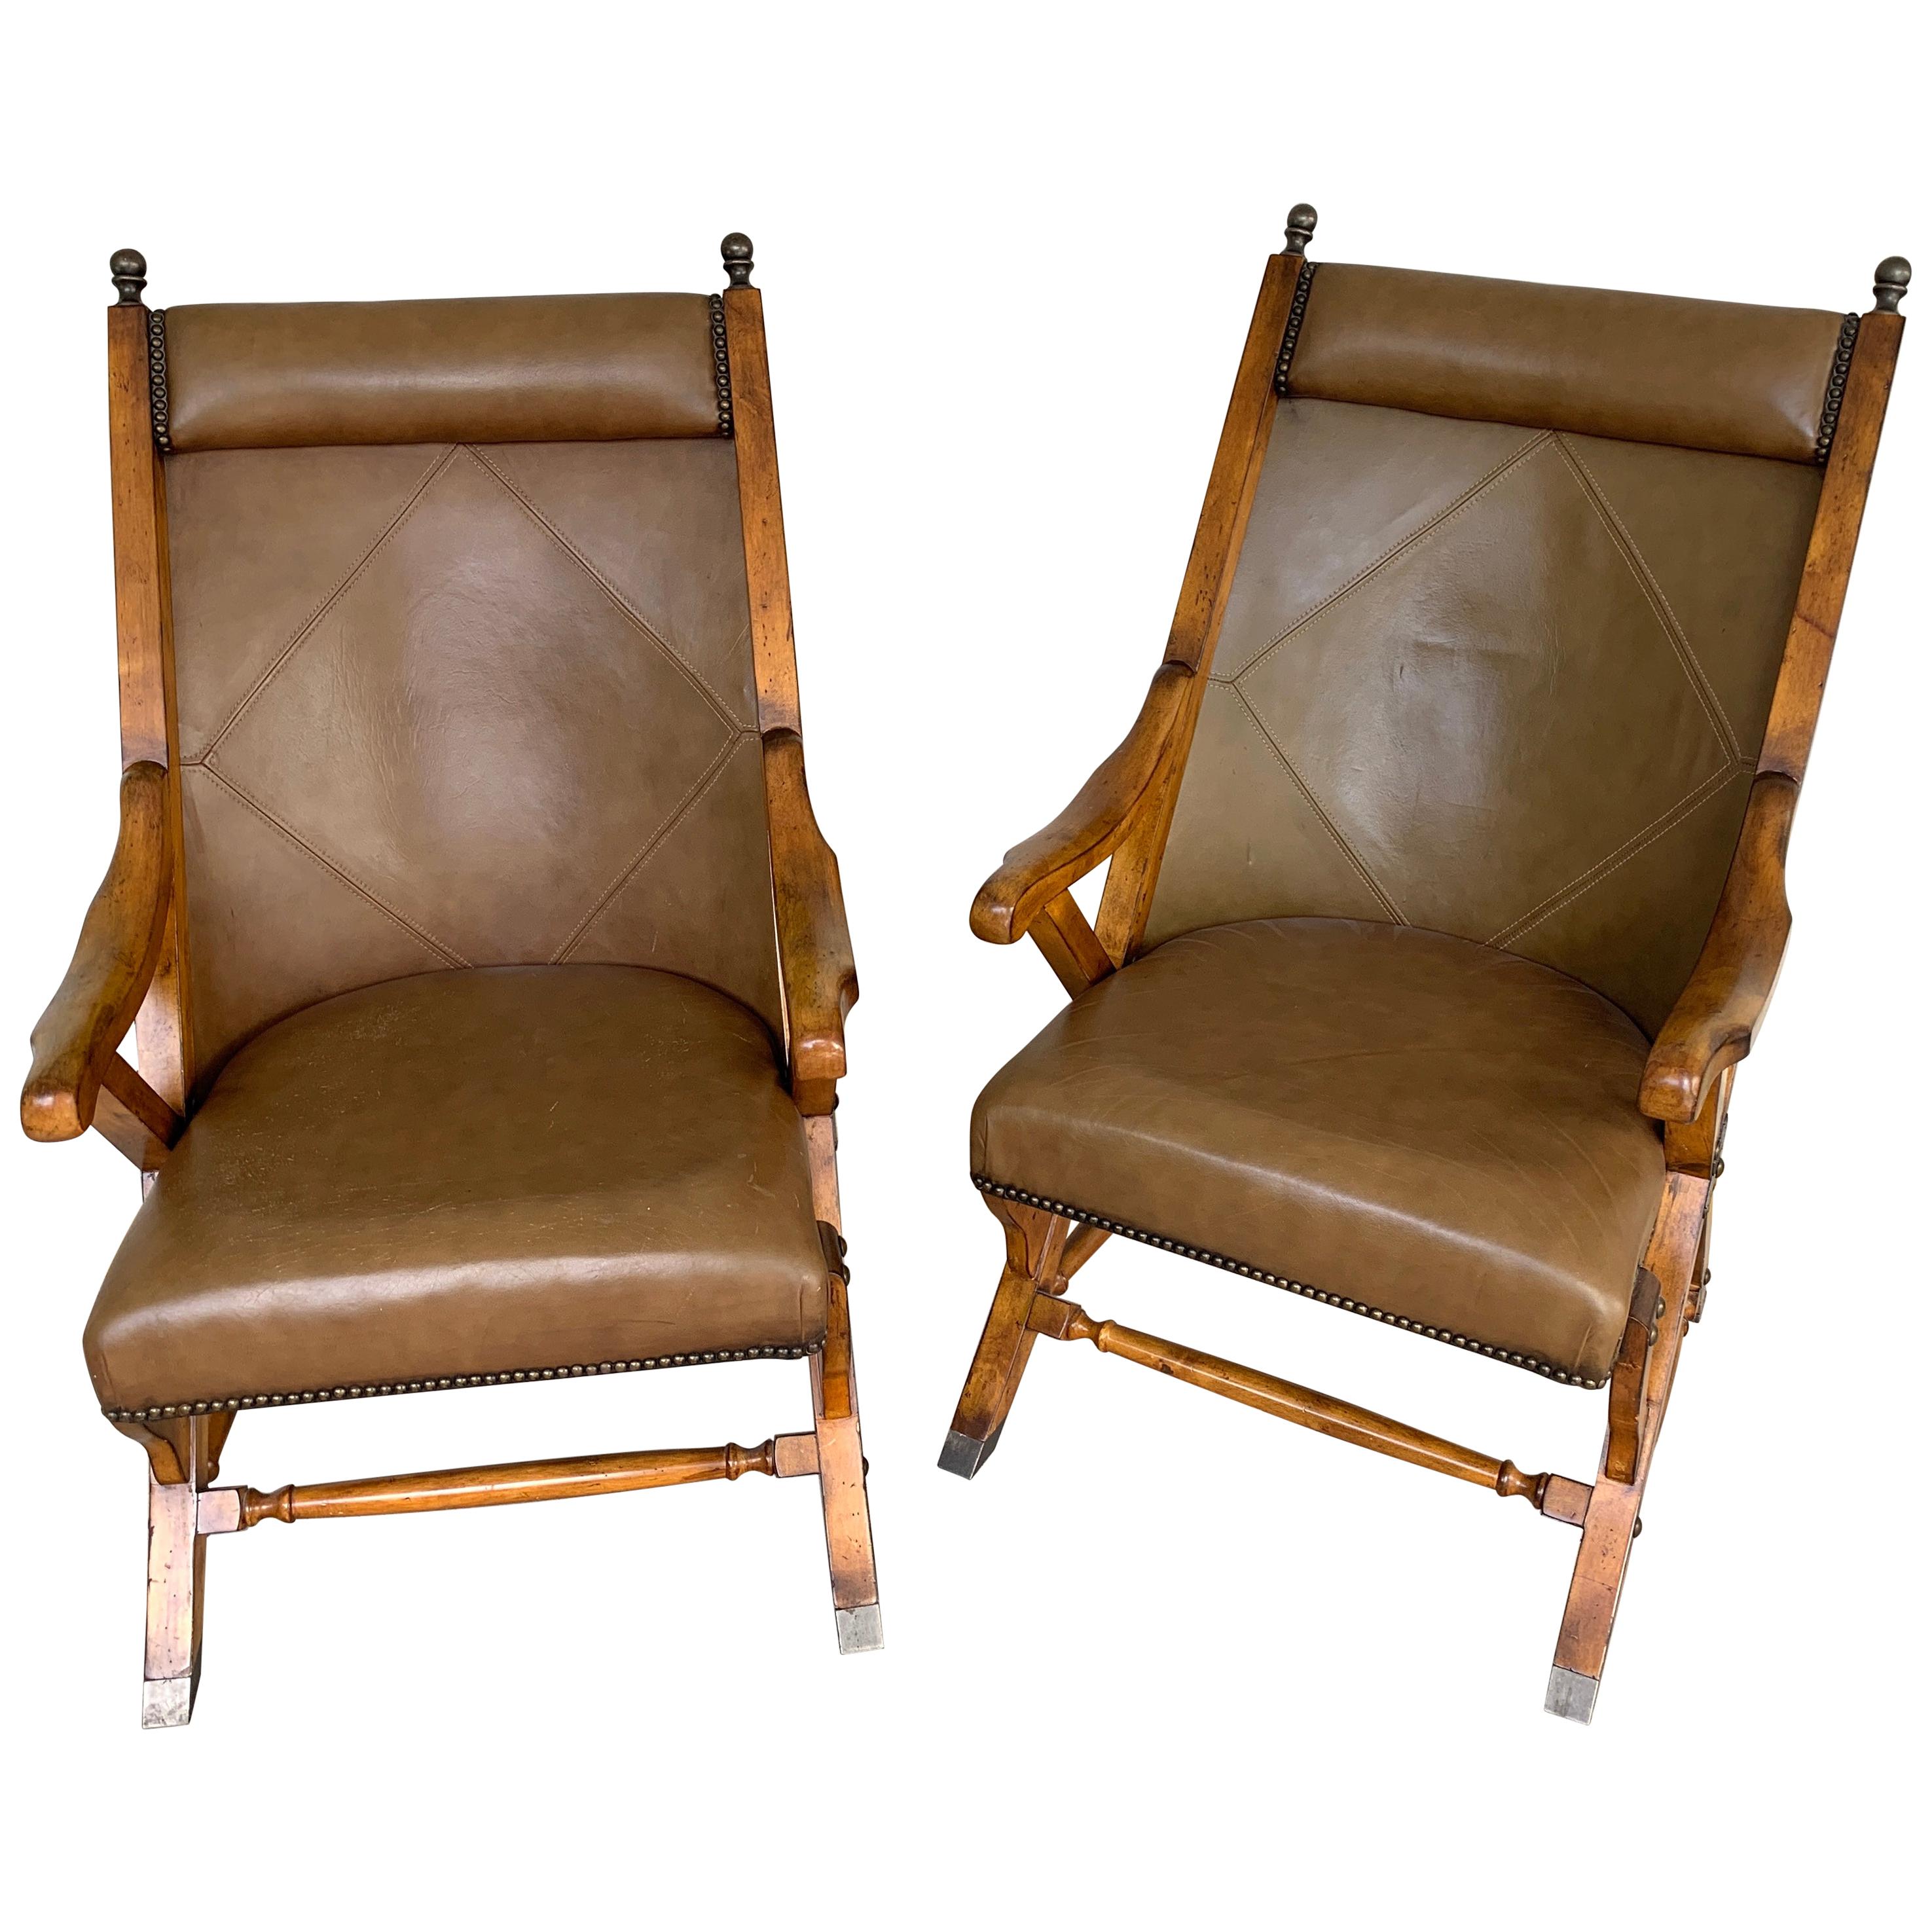 Pair of English Campaign Style Chair Elm and Leather Chairs For Sale